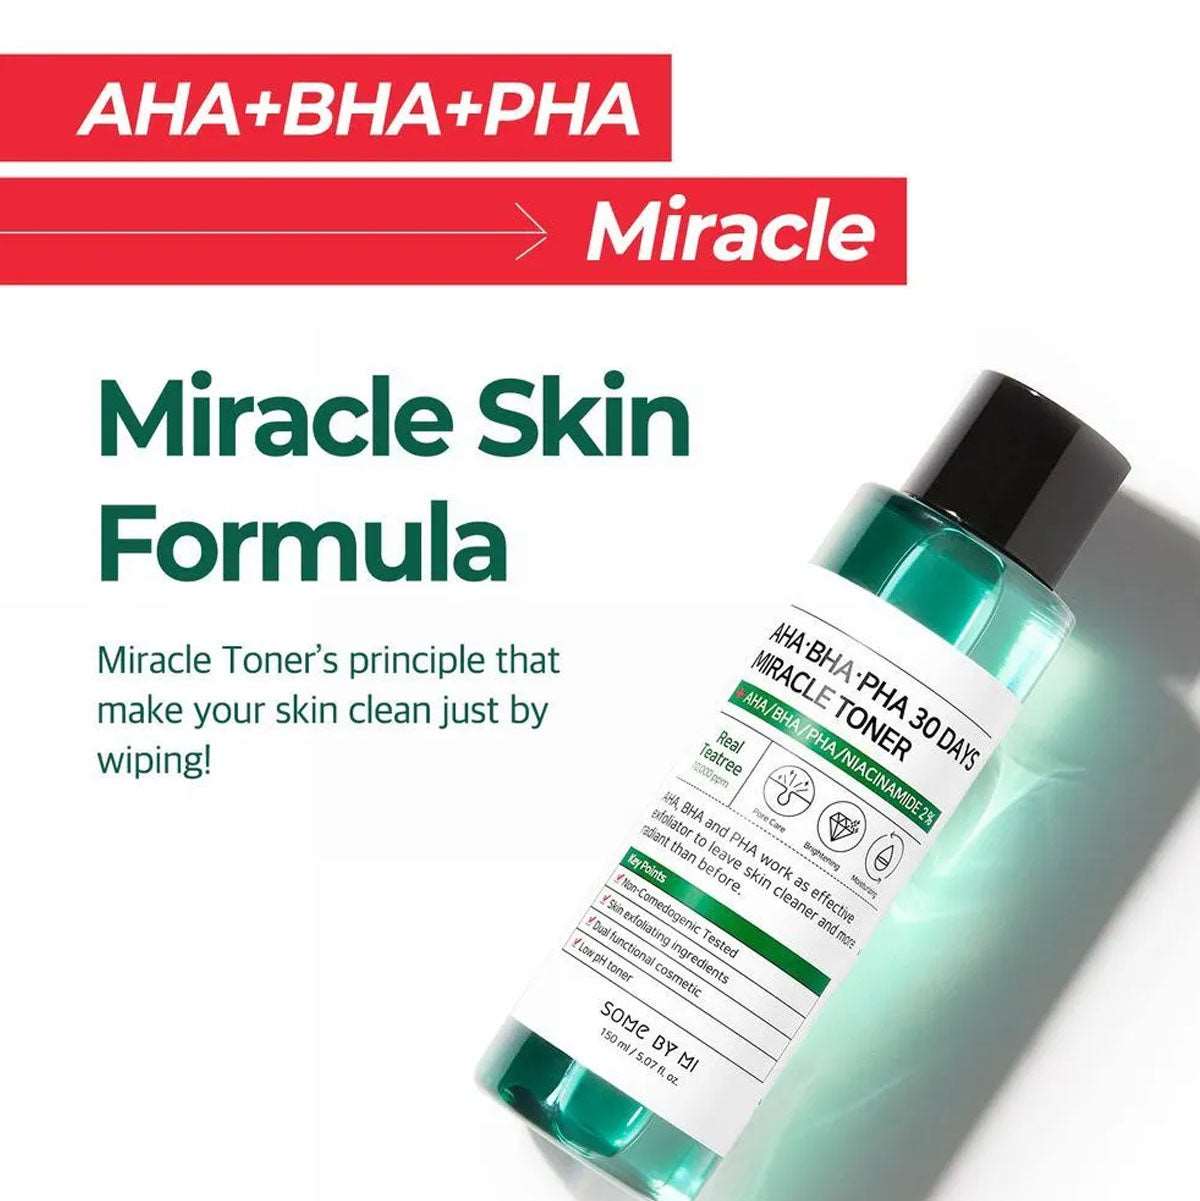 Some By Mi  AHA-BHA-PHA 30 Days Miracle Toner – Be Your Skin Costa Rica